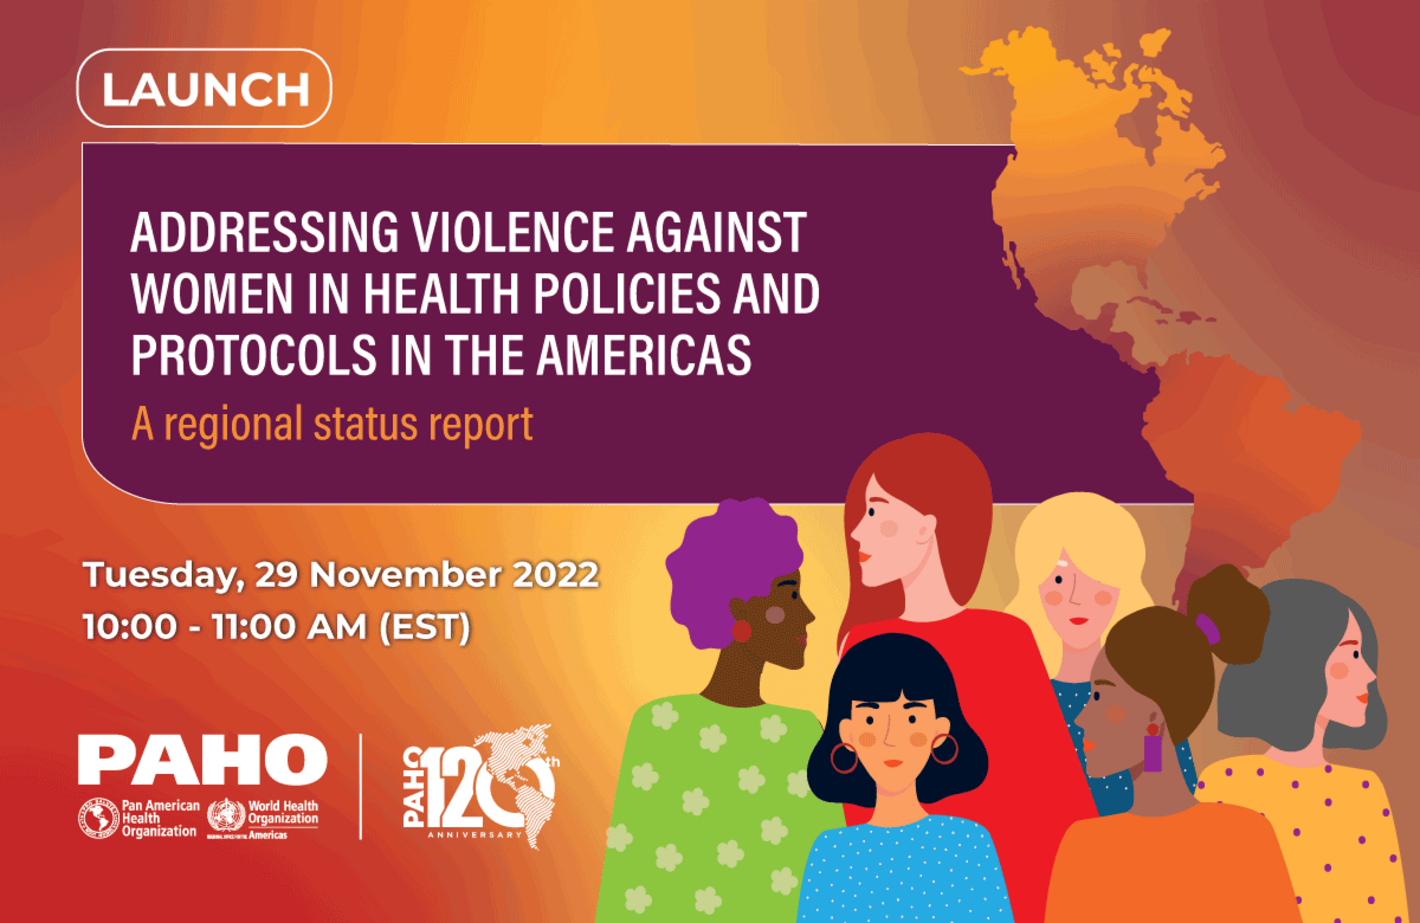 Launch of Addressing Violence Against Women in Health Policies and Protocols in the Americas: Regional Status Report 2022